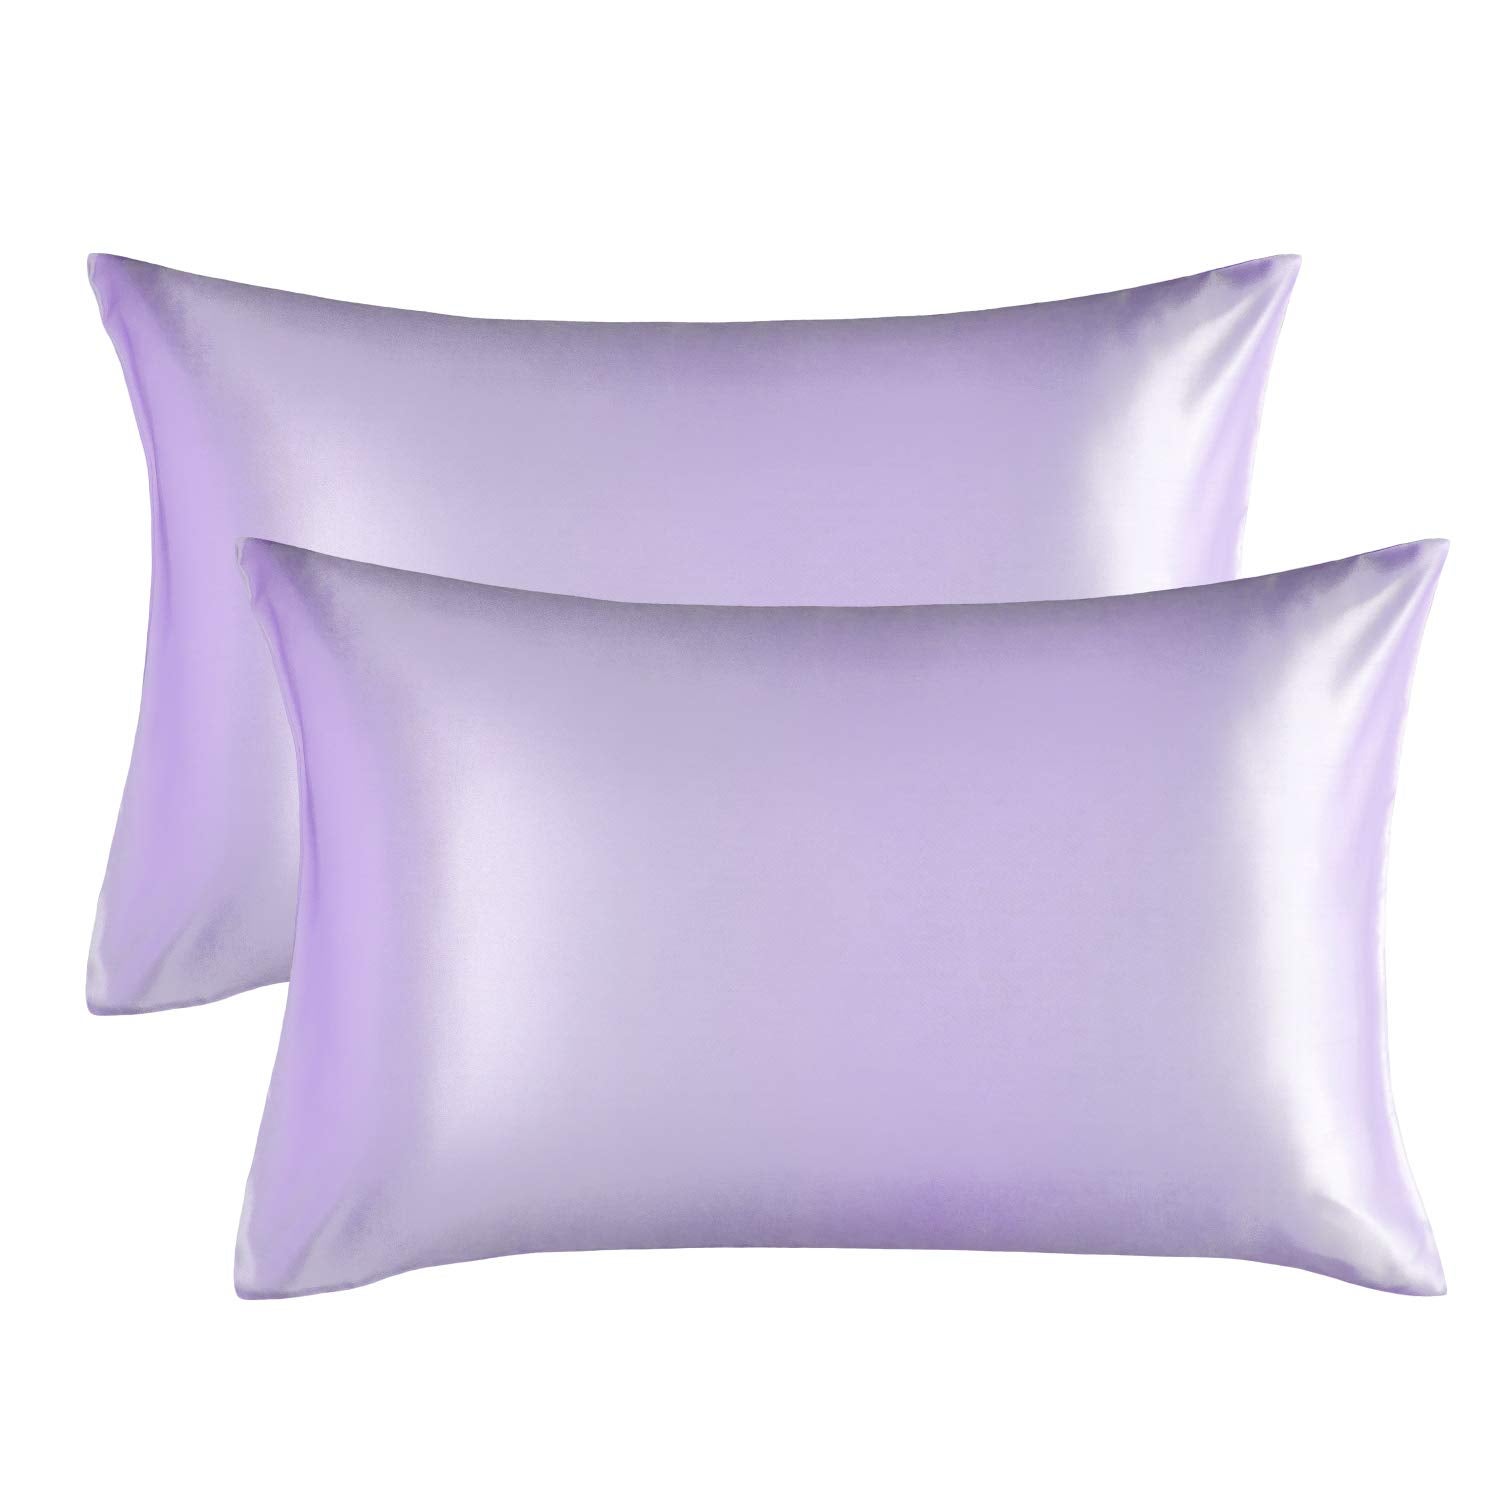 50 x 75 cm Fade Resistant Hansleep 4 Pack Satin Pillowcases for Hair and Skin Light Grey Super Soft Pillow Cases & Pillow Shames Set with Envelope Closure